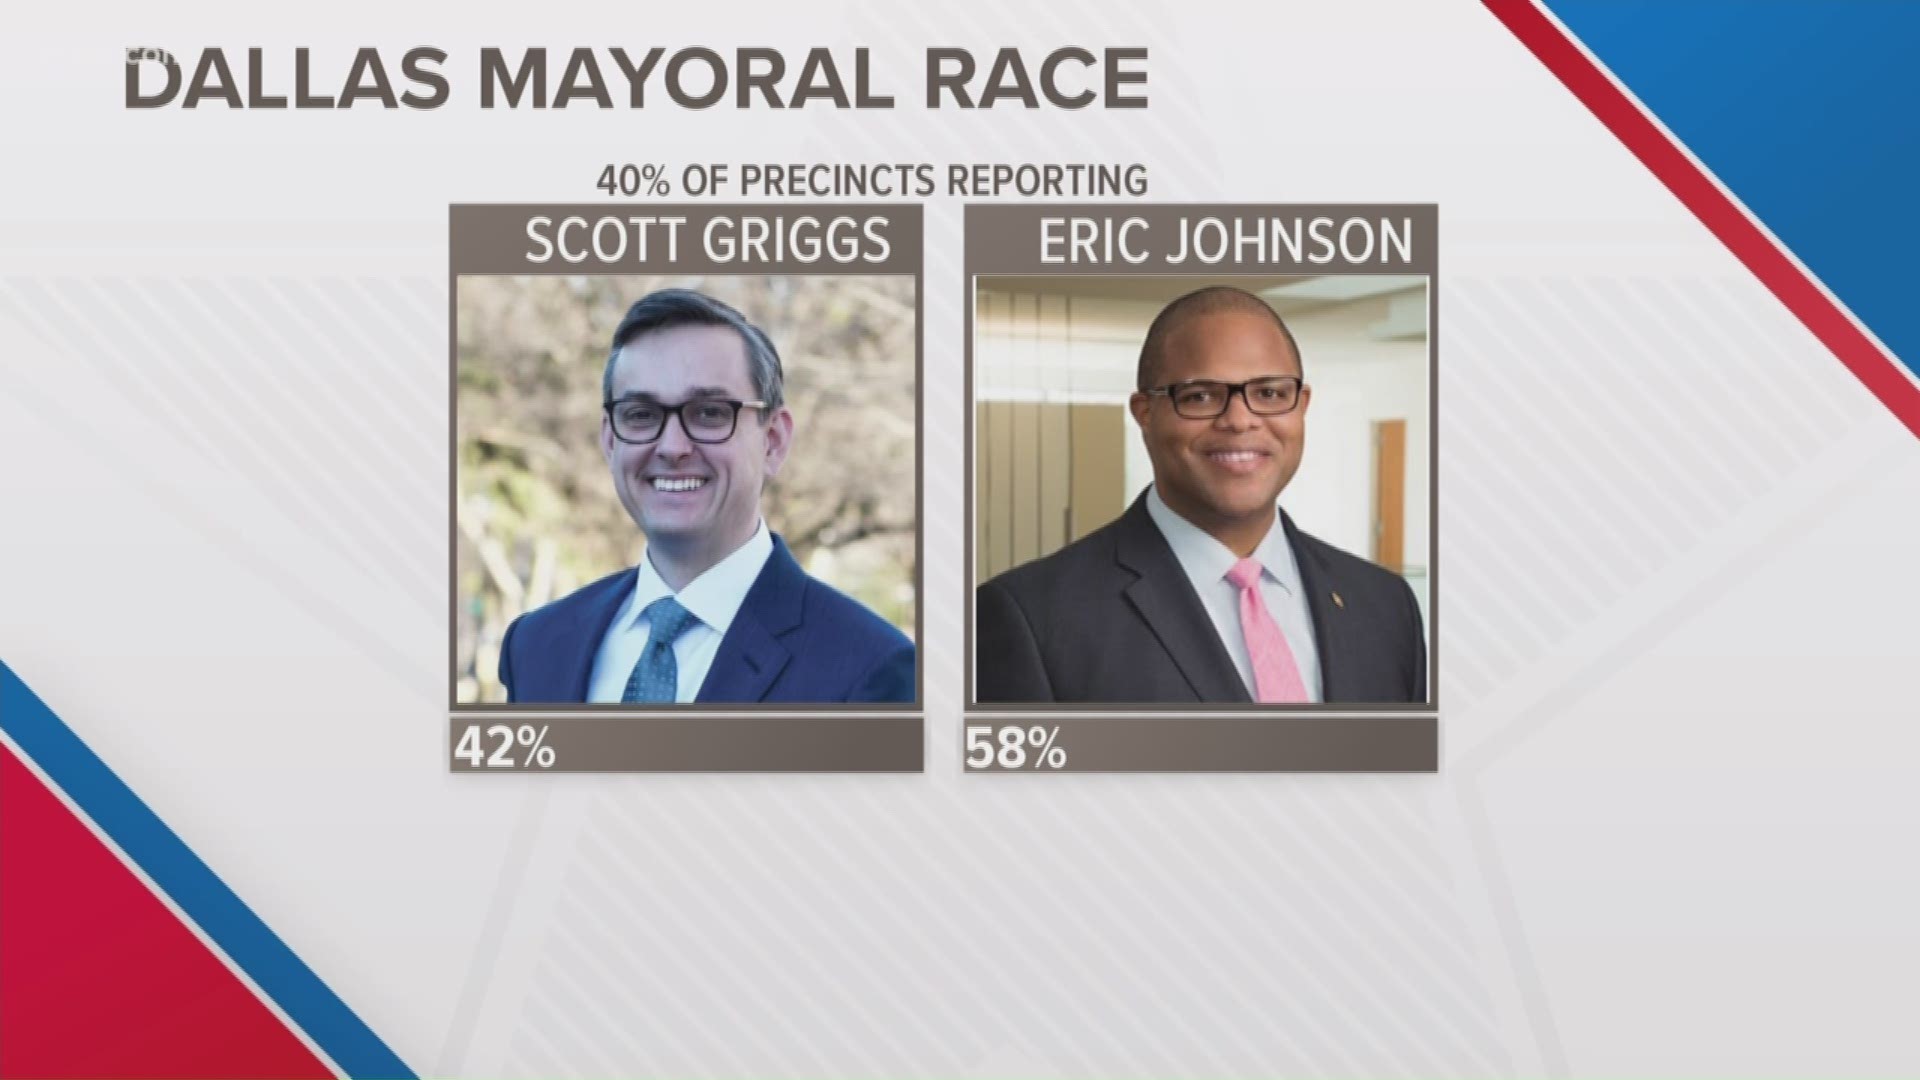 Johnson beat Griggs by double-digits.